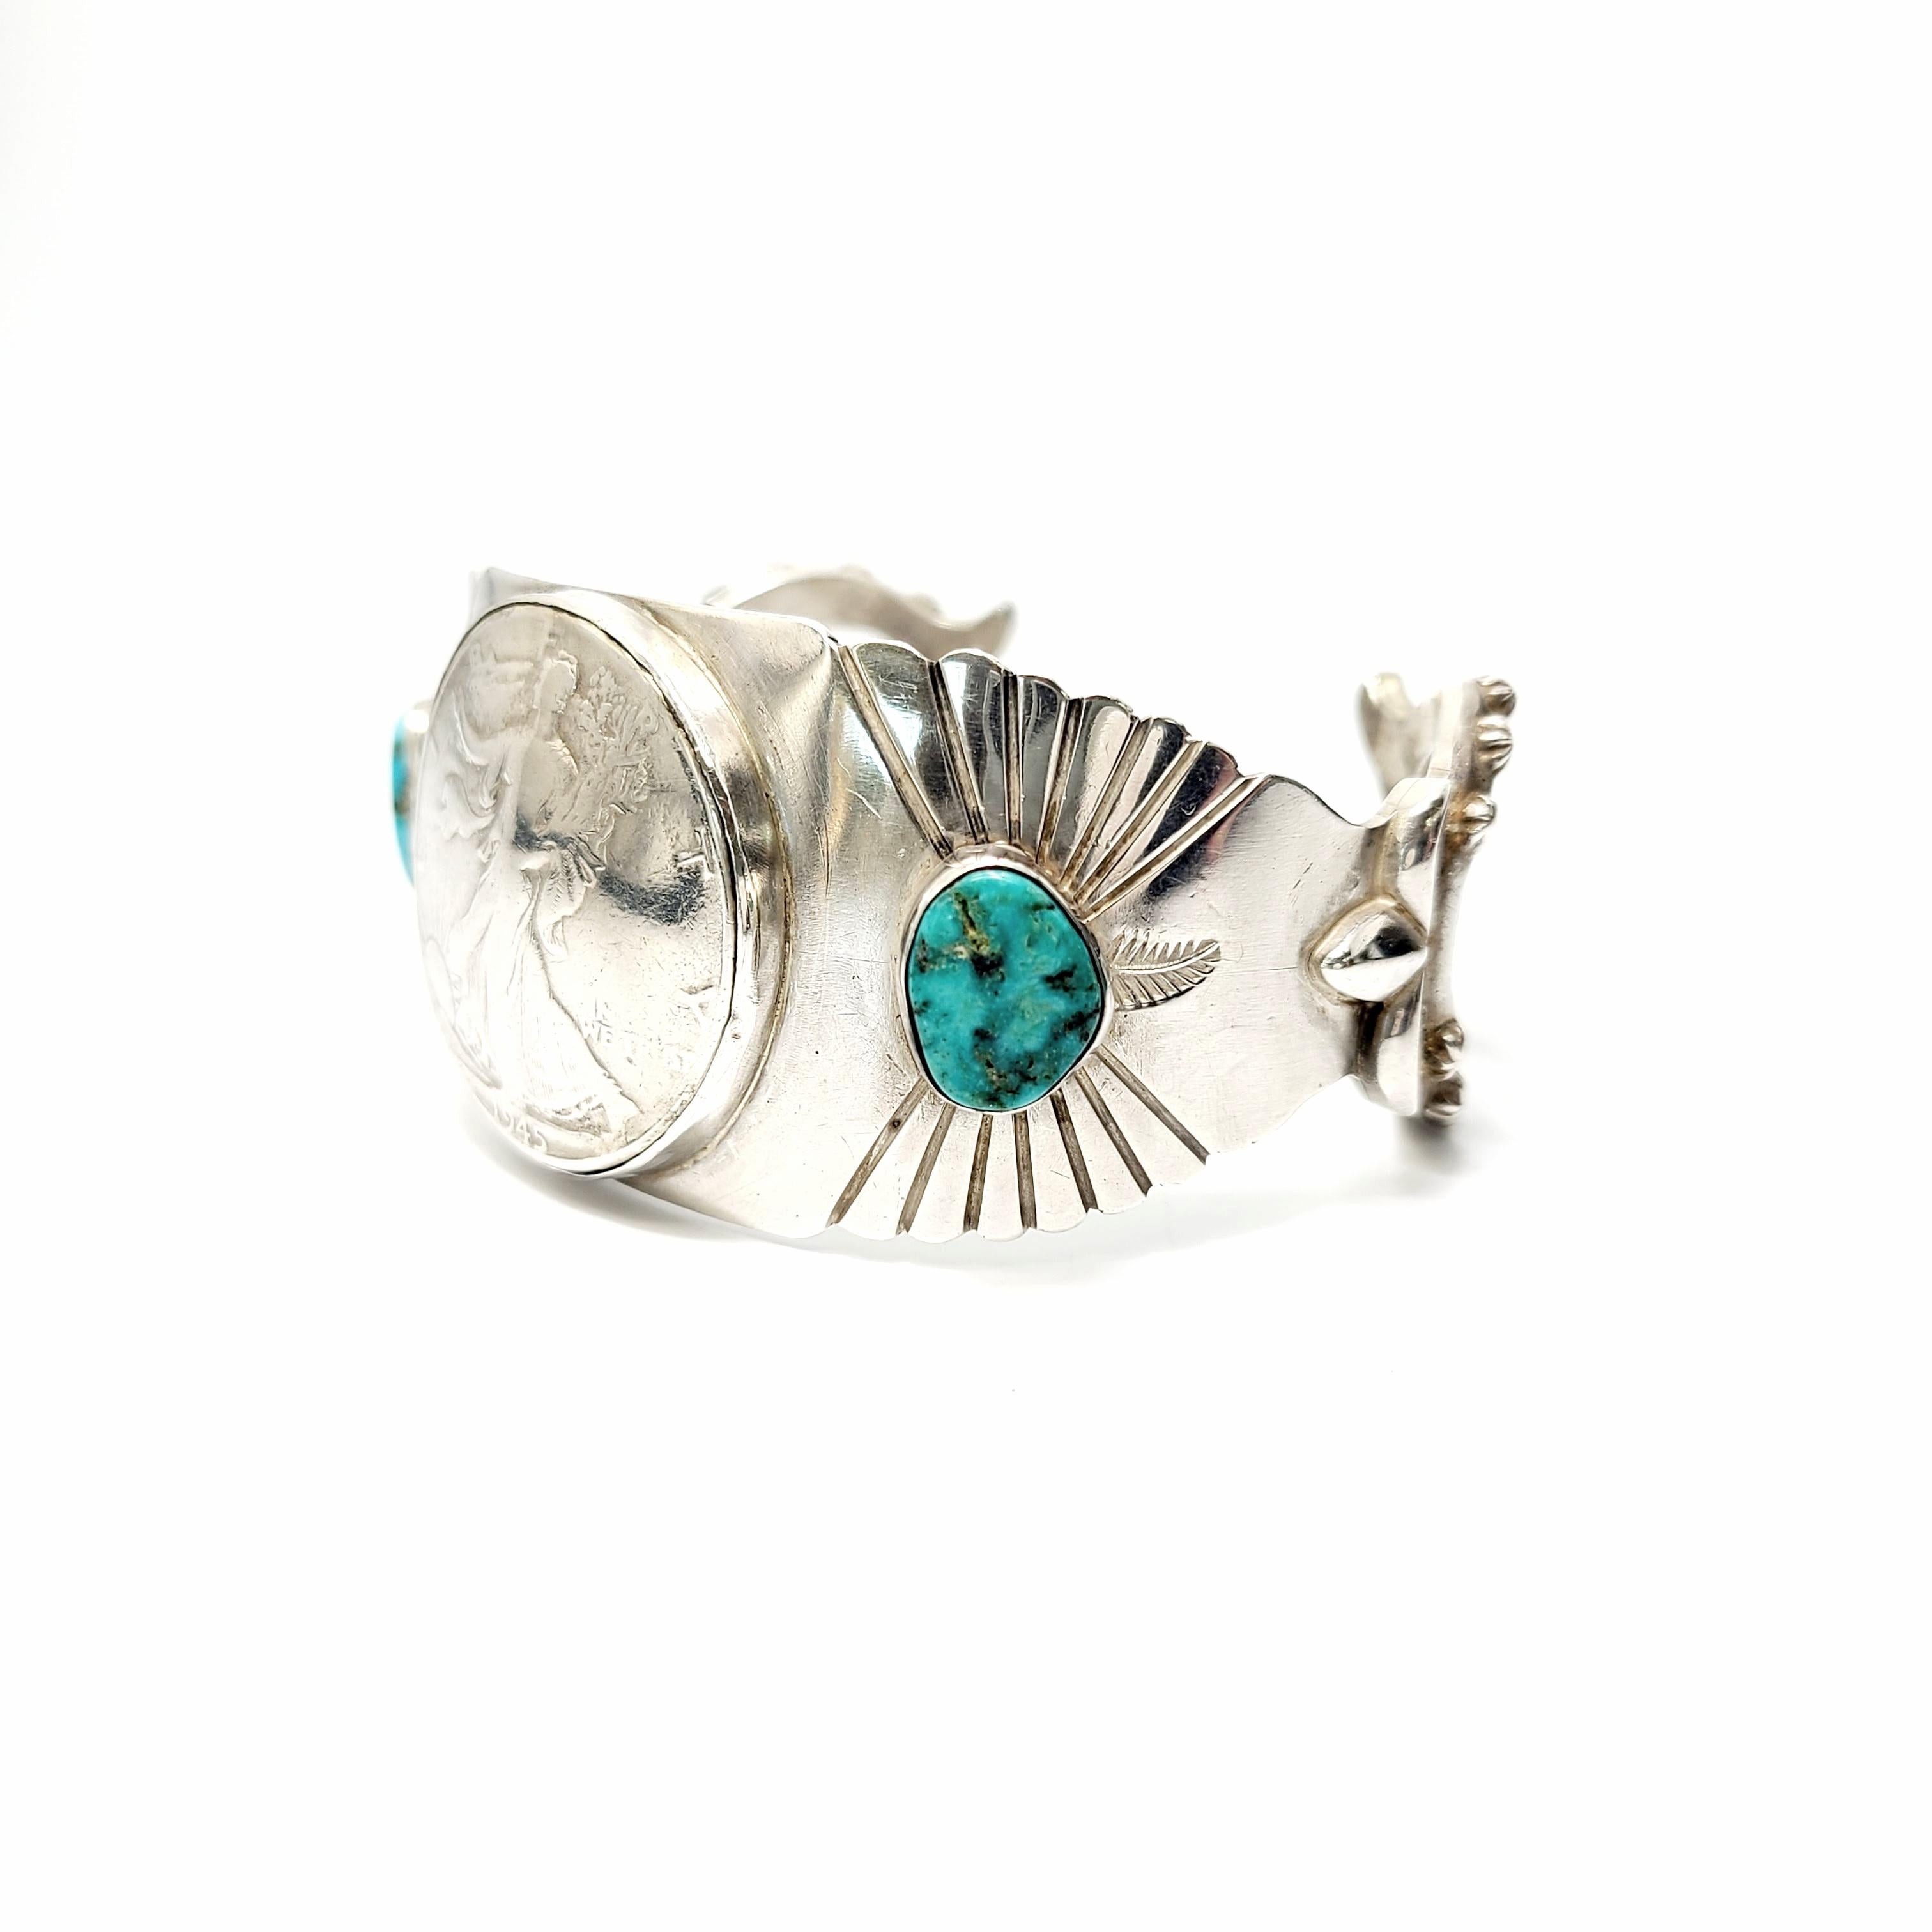 Wide sterling silver cuff bracelet with Walking Liberty half dollar and turquoise from Running Bear Shop.

Running Bear was a trader shop in business since the 1970s in Gallup, NM. This piece features a 1945 Walking Liberty half dollar coin at it's